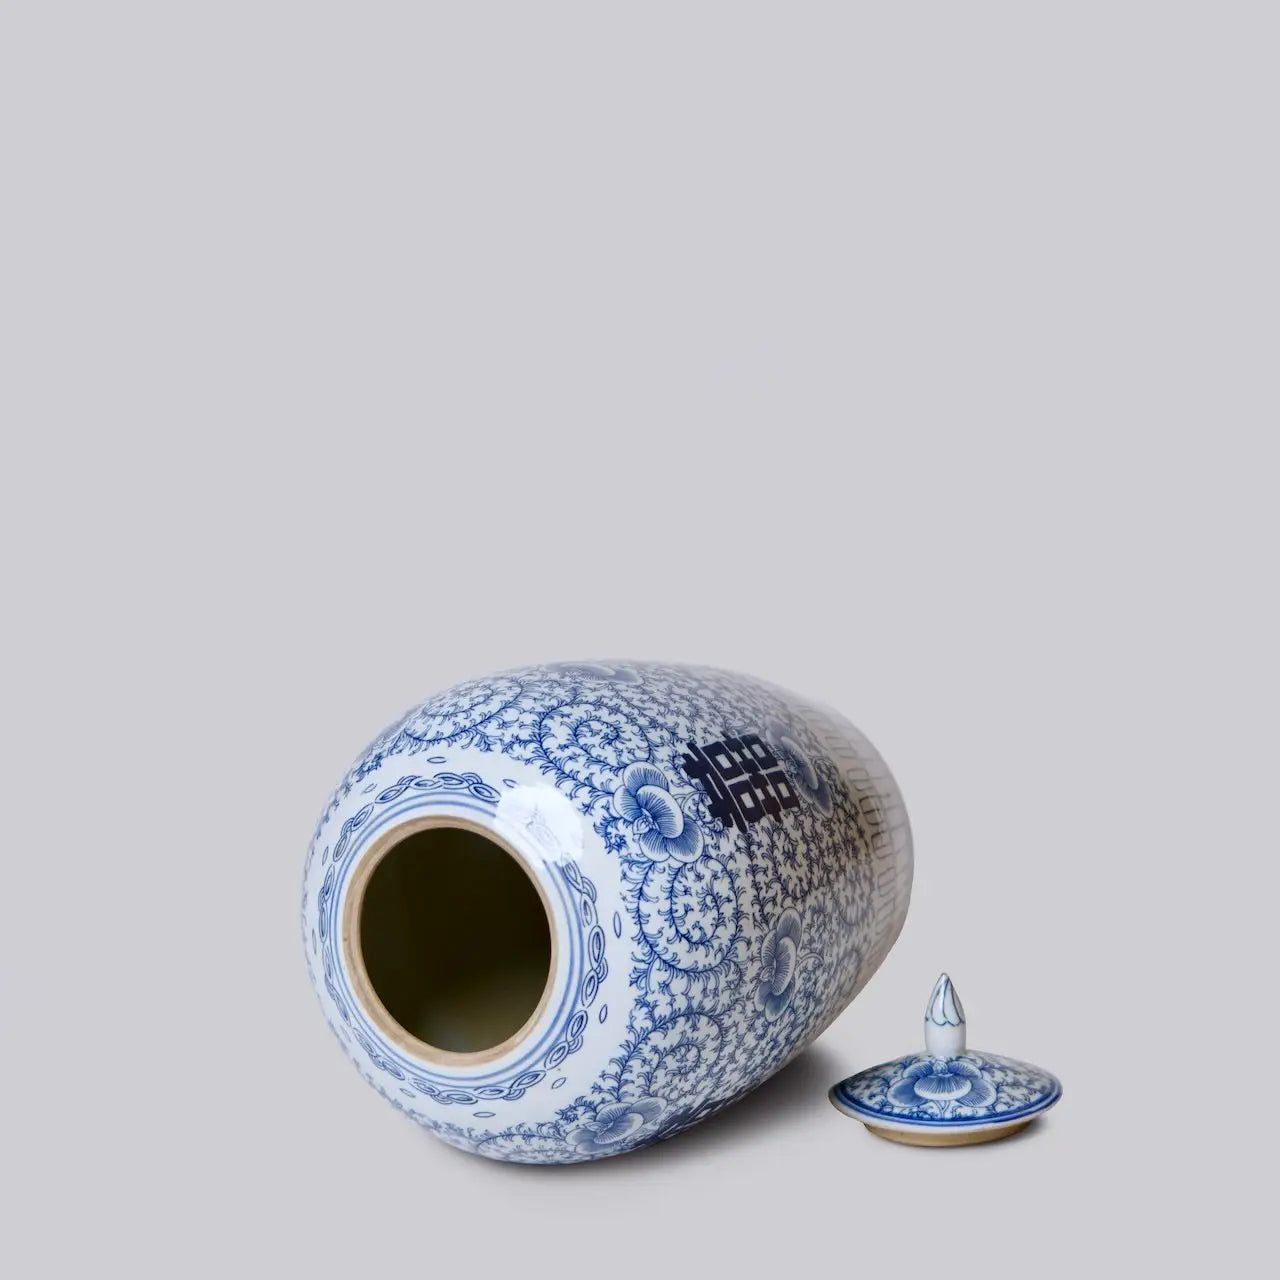 Double Happiness Blue and White Porcelain Finial Jar